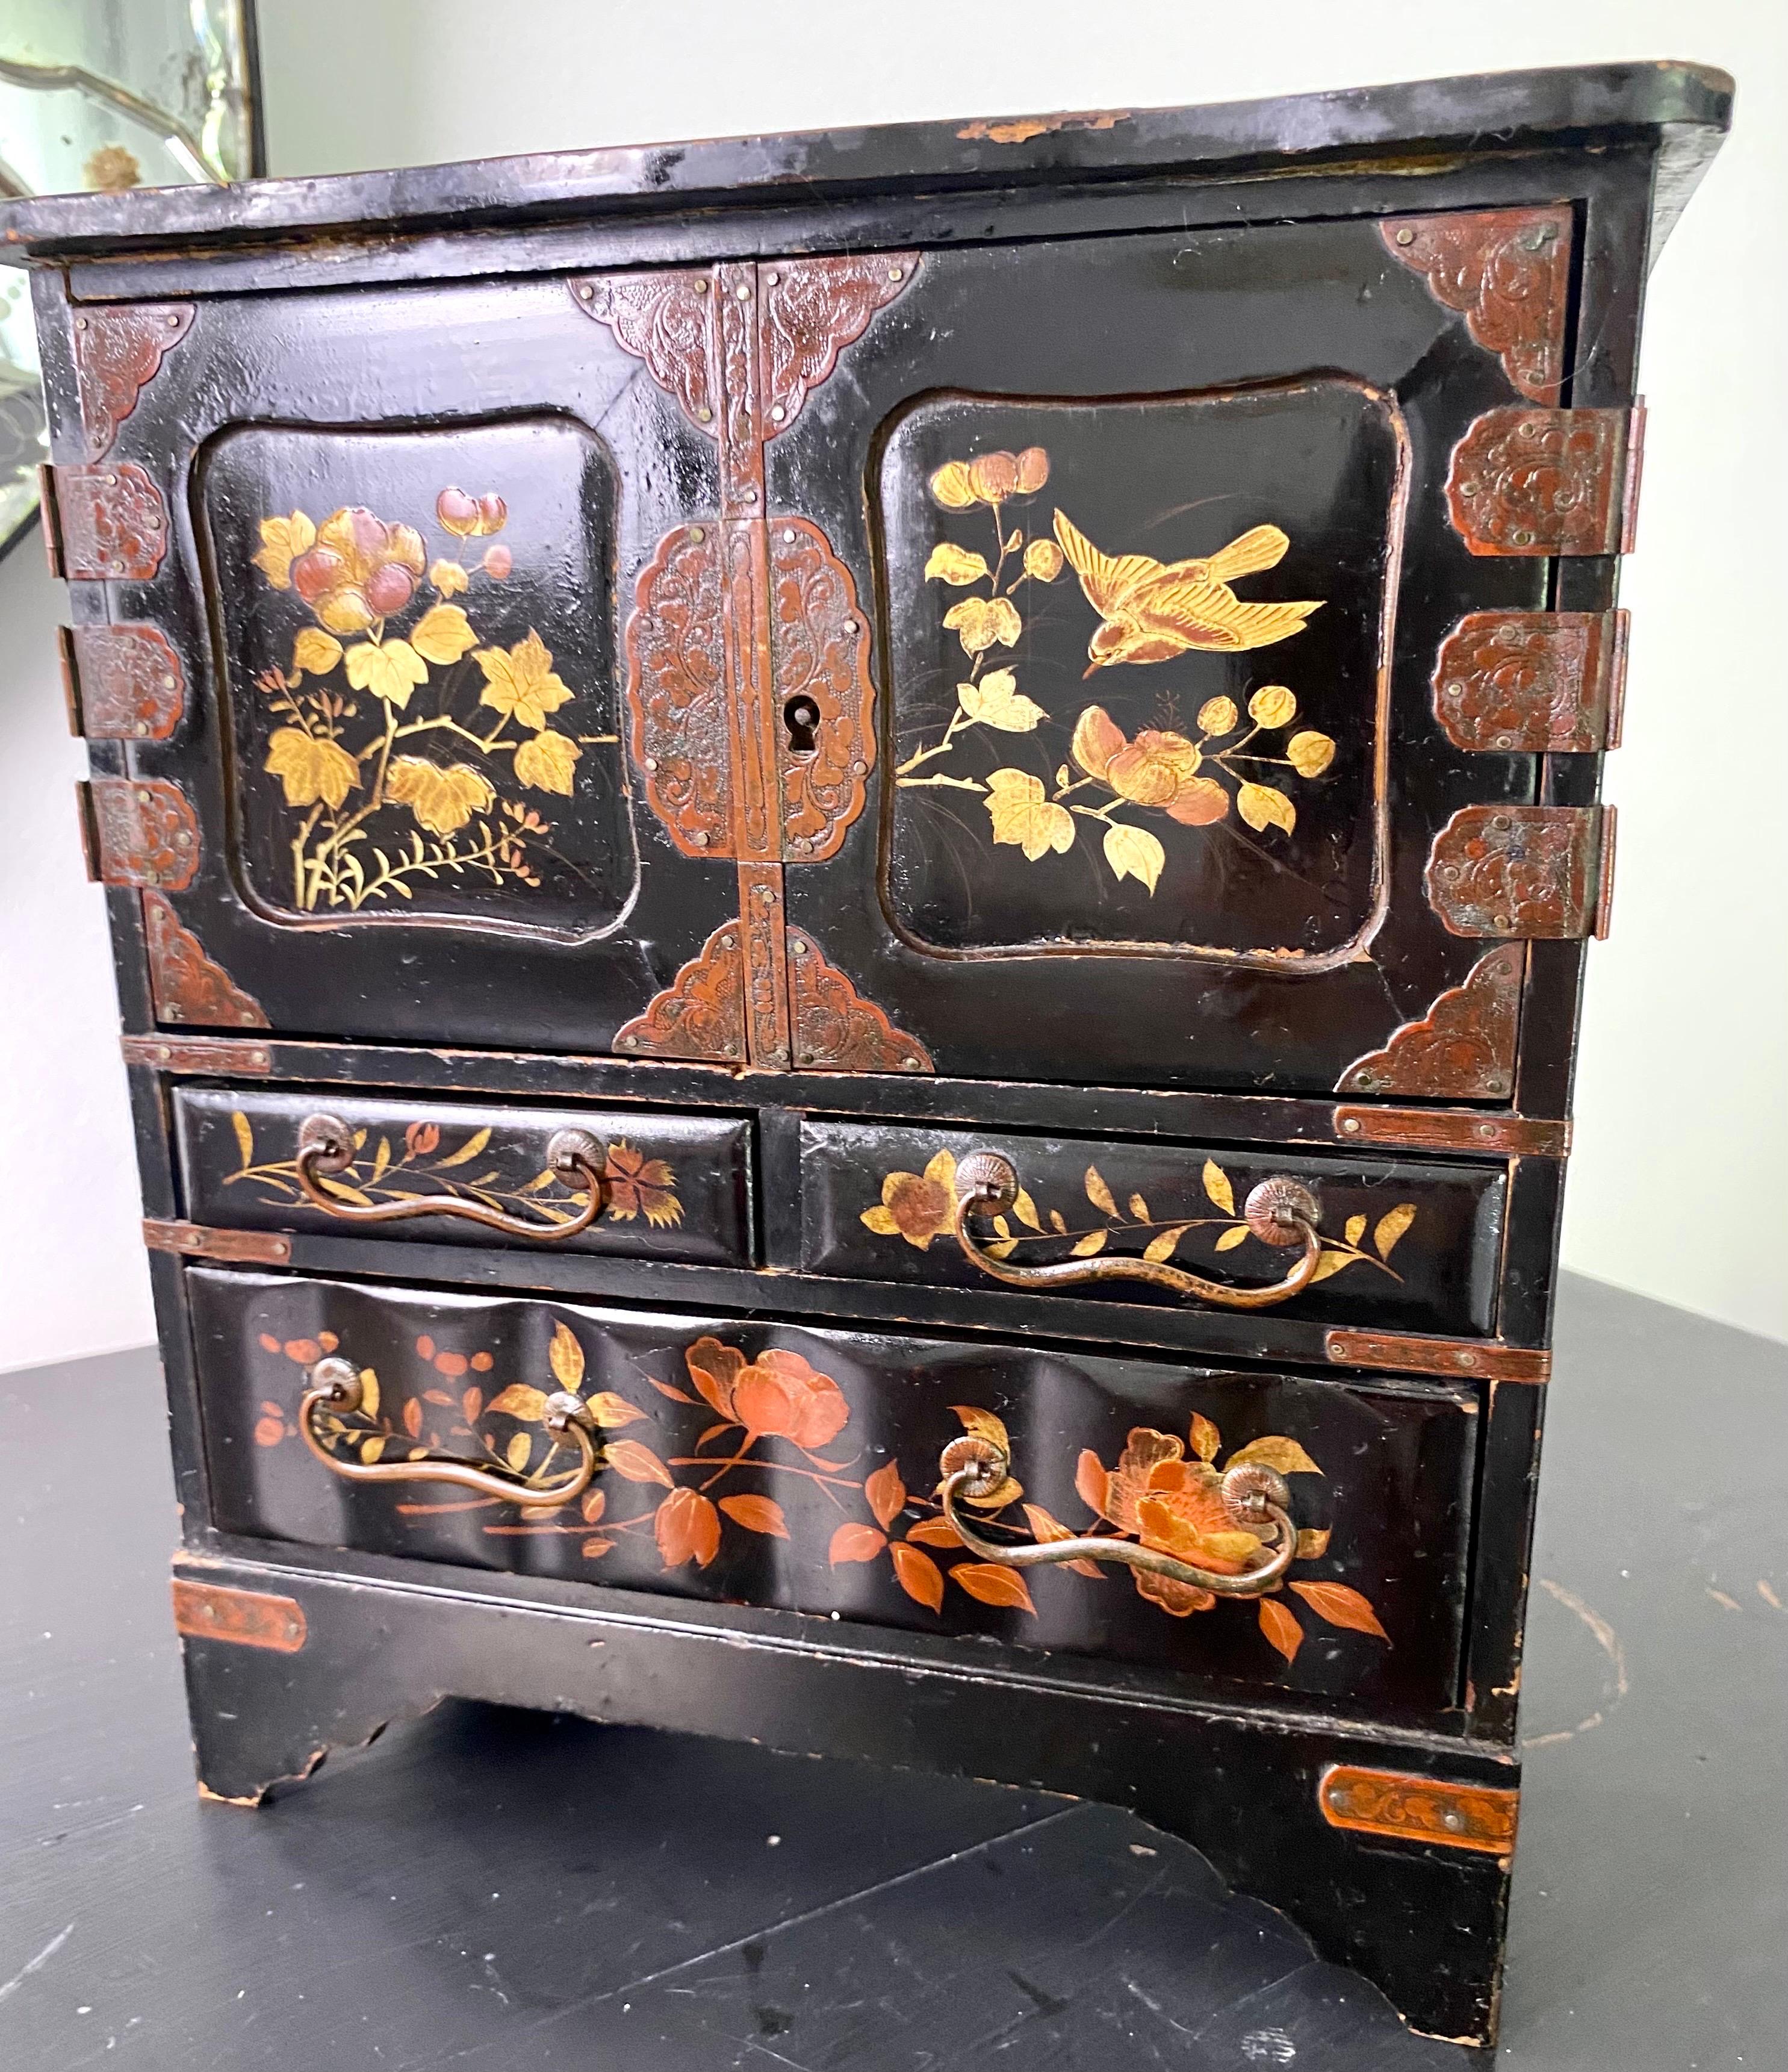 Small Japanese temple cabinet in black lacquer with gilding.
Decorated with birds and Asian landscapes. This plant decoration is particularly common in Japanese iconography, and symbolizes the arrival of spring.
The cabinet contains 7 drawers: 2